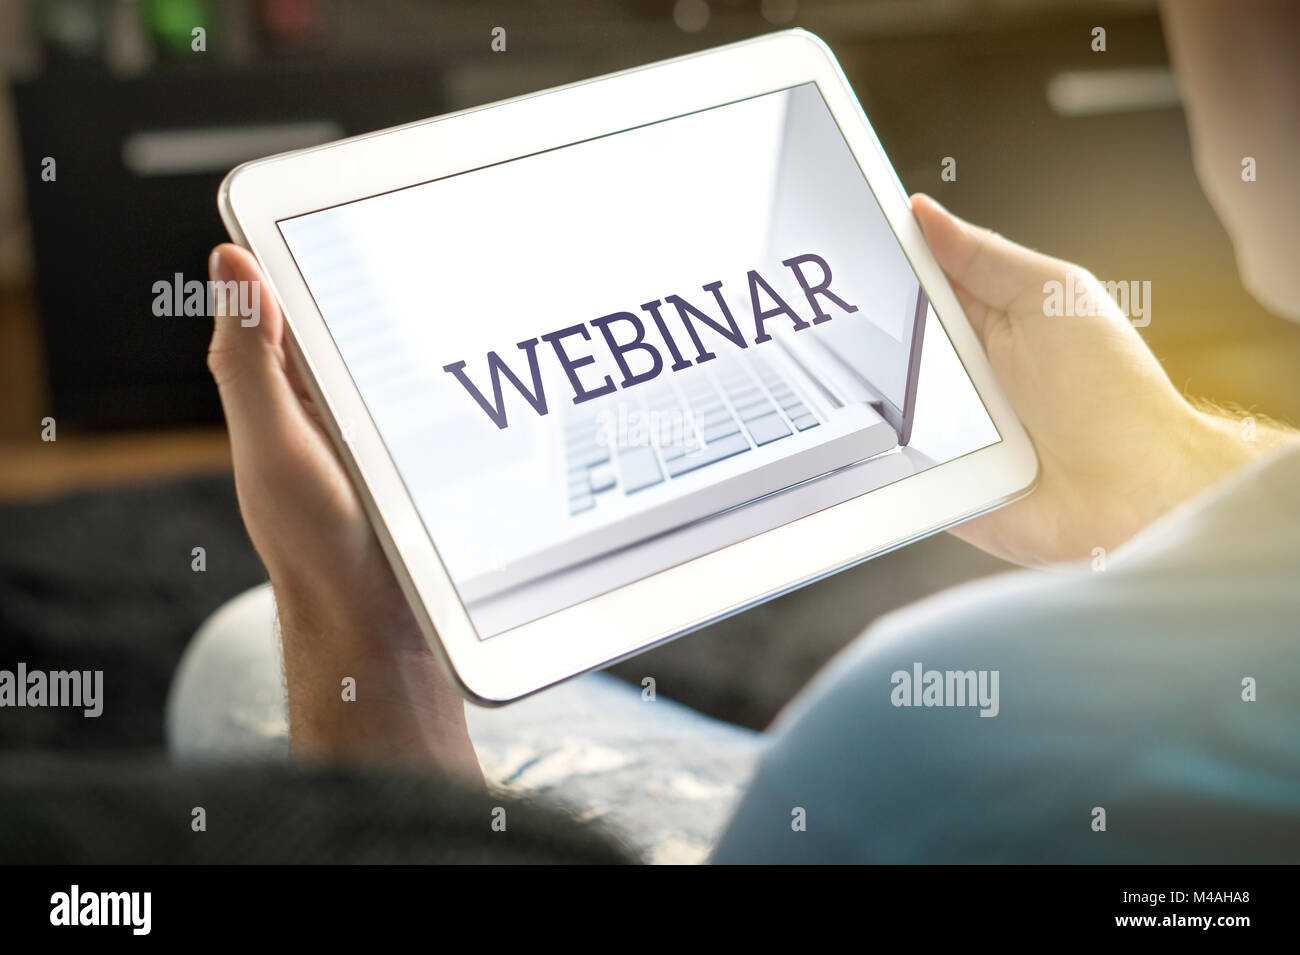 Webinar on tablet screen. Man holding smart mobile device and participating in a web seminar. Stock Photo